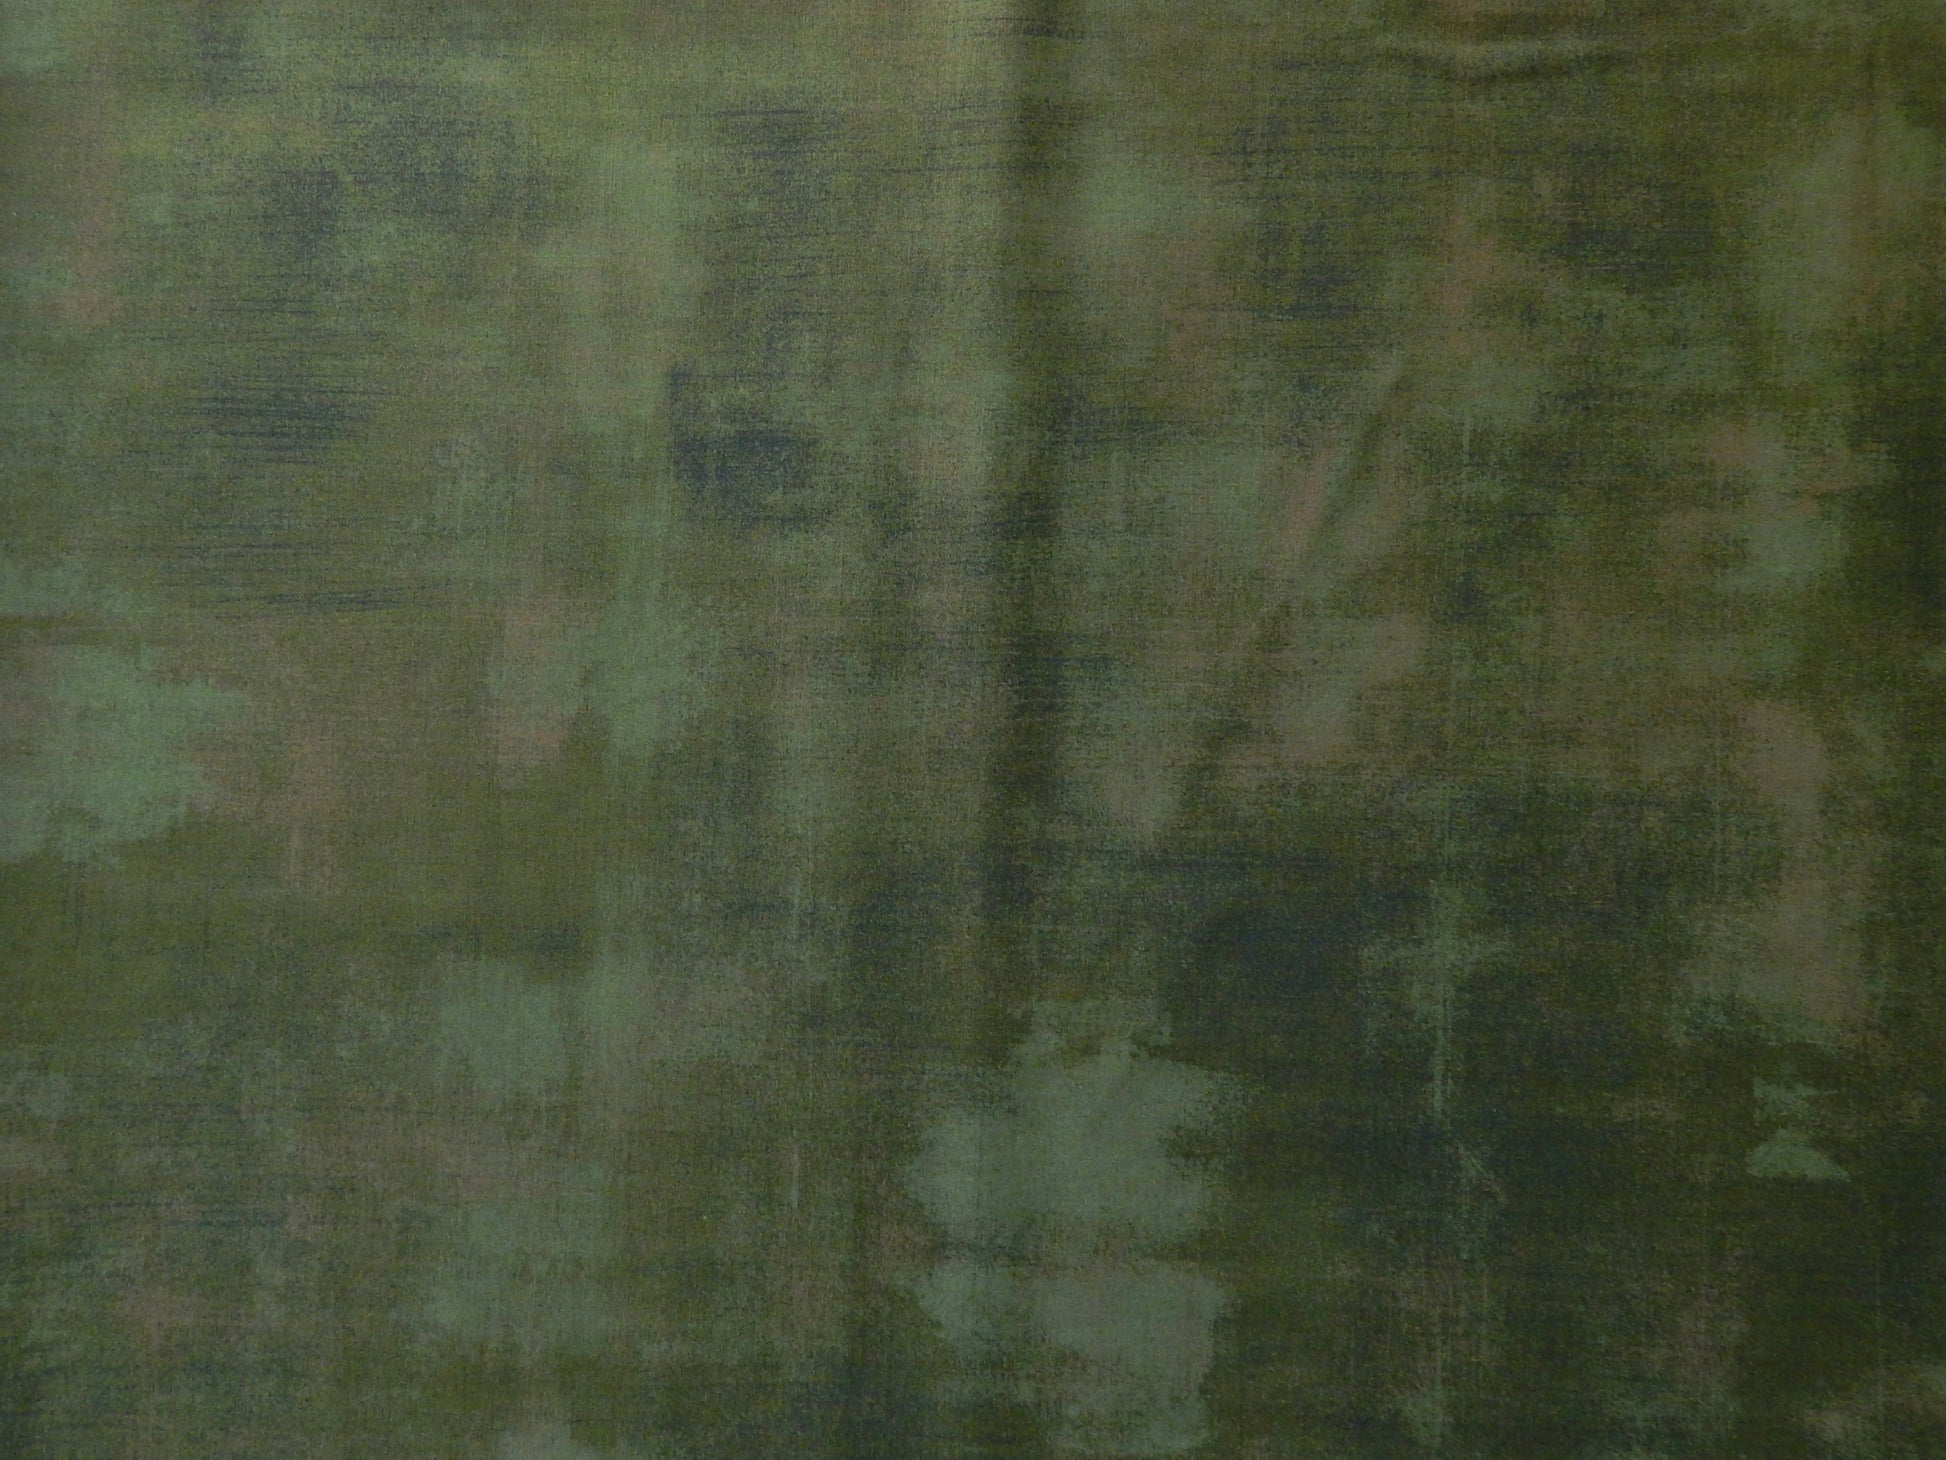 green and brown fabric